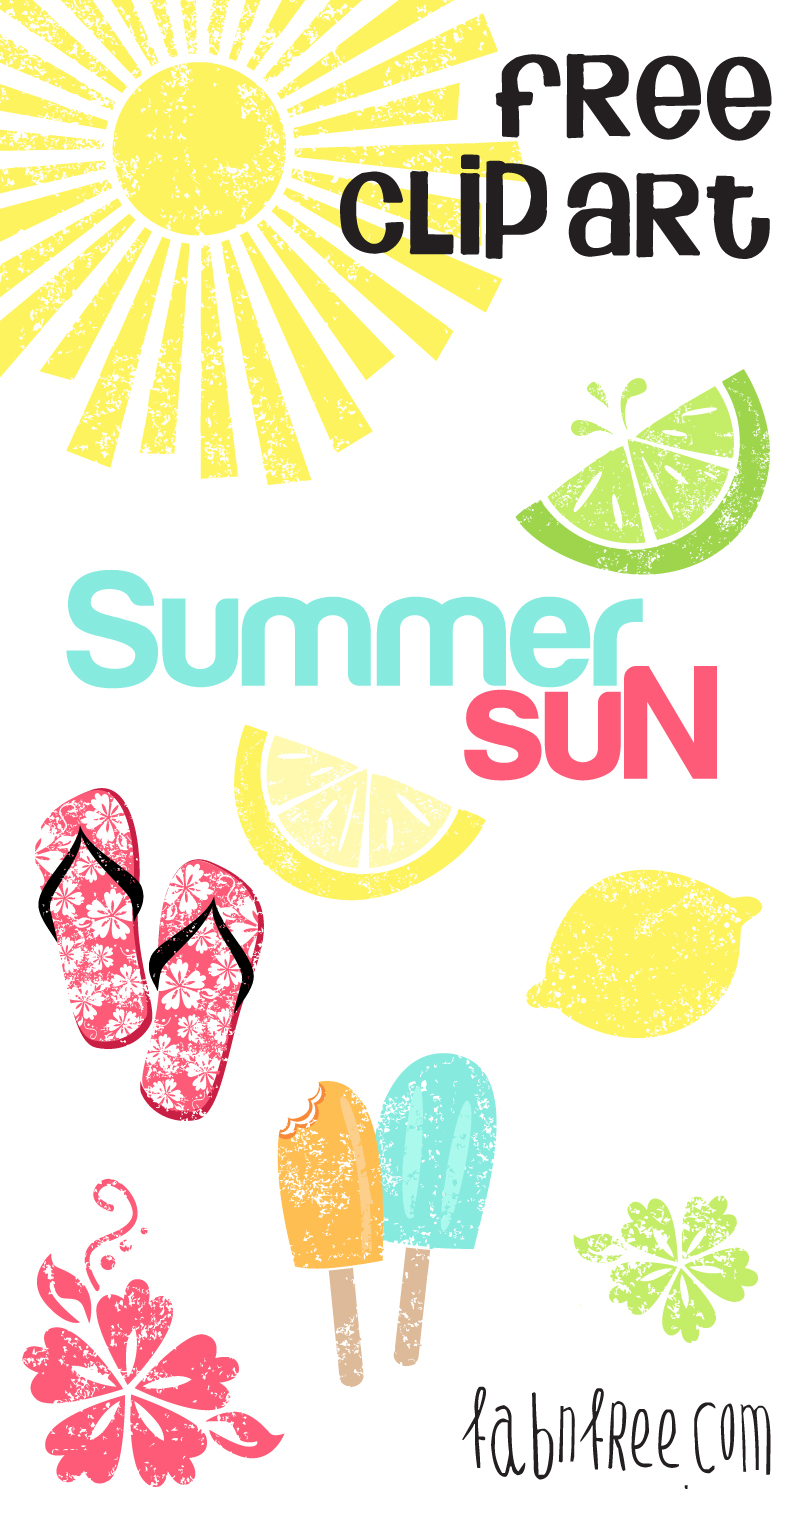 Free Summer Clipart Set  //  Commercial Use  //  fabnfree.com